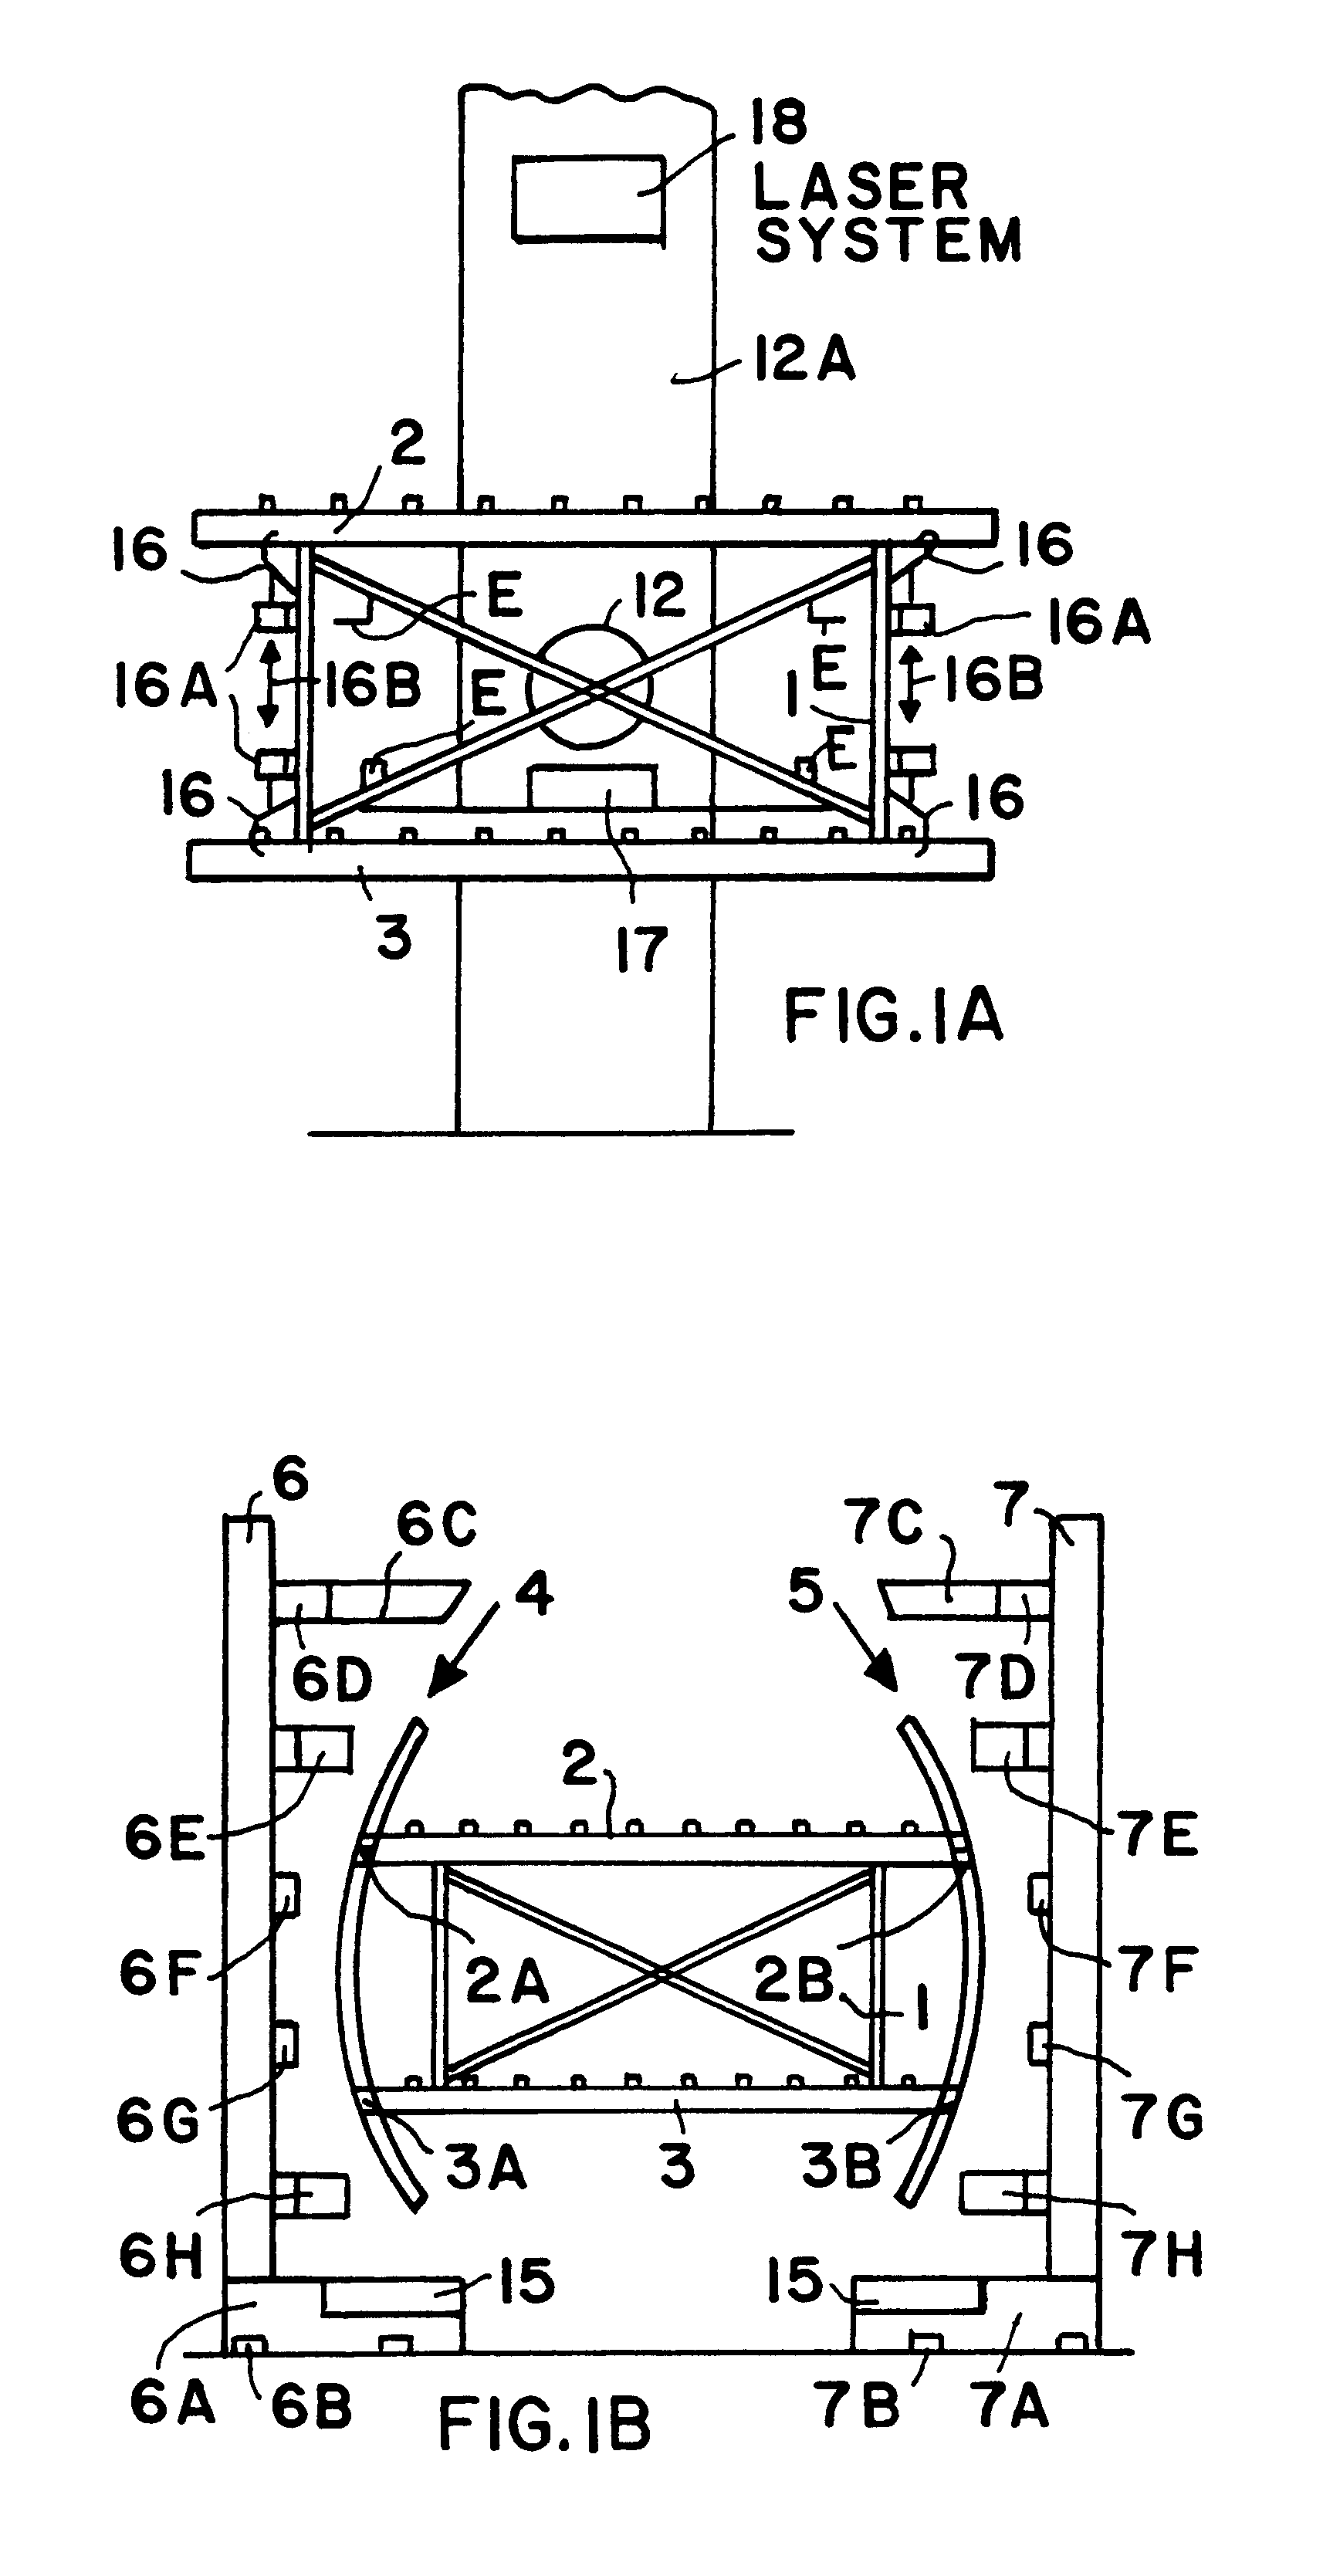 Method for assembling a three-dimensional structural component